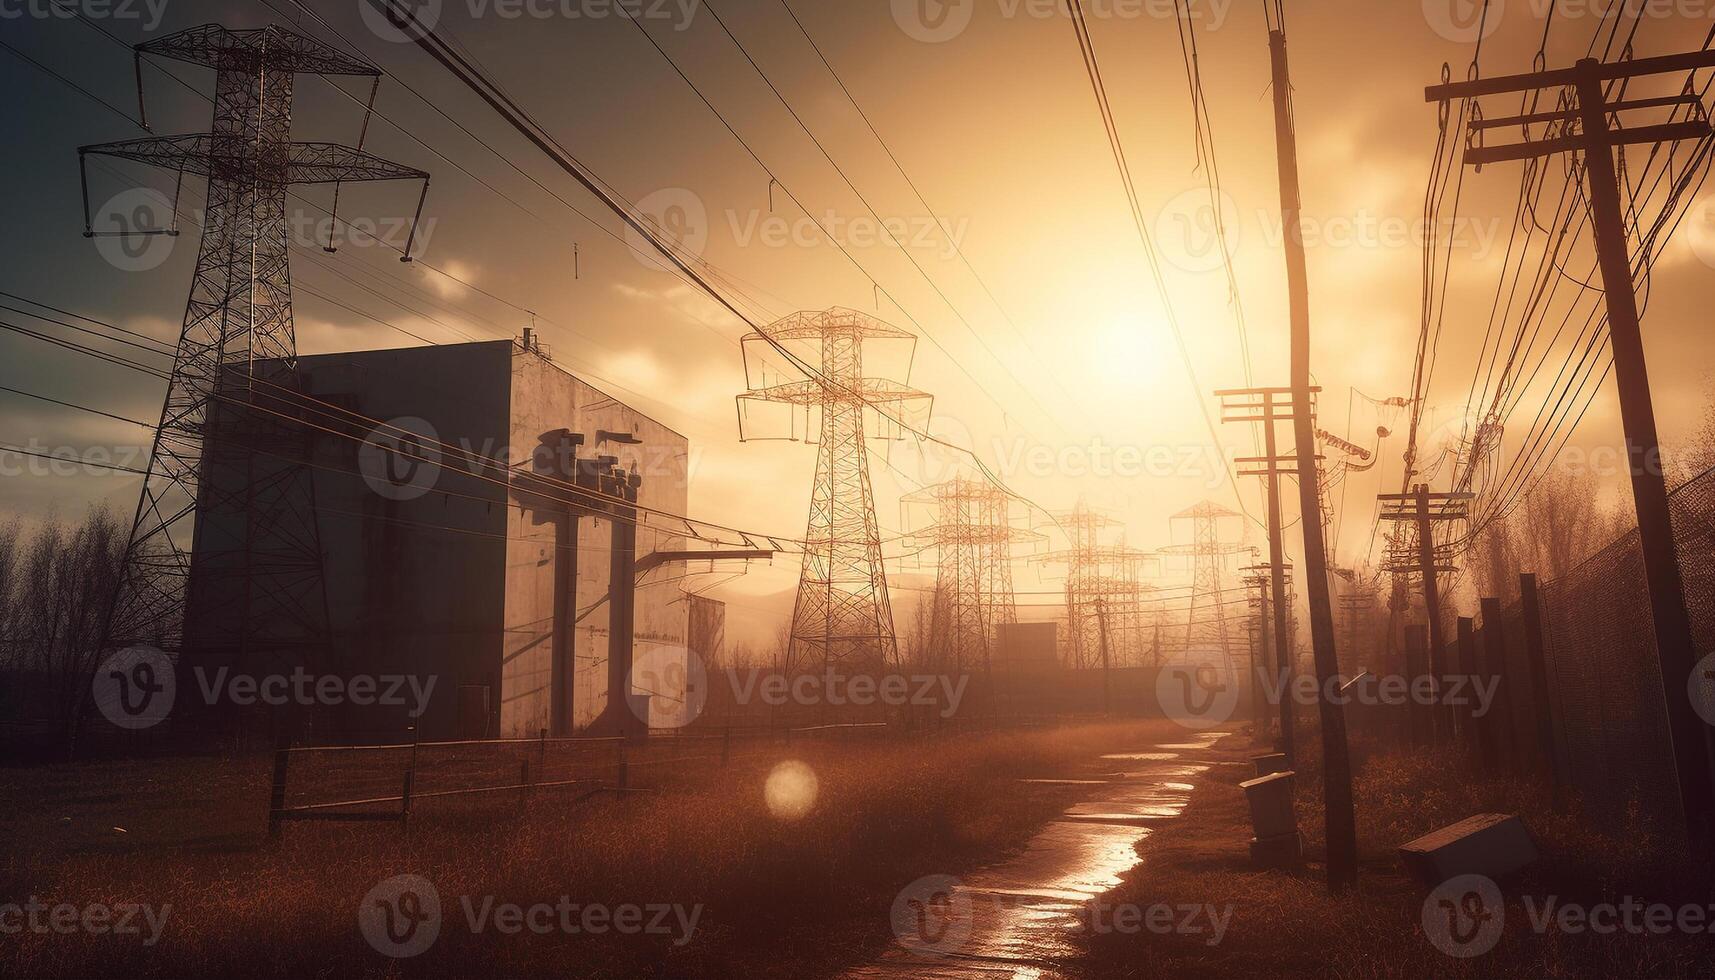 Sunrise silhouette of high voltage transformer in industrial landscape development generated by AI photo